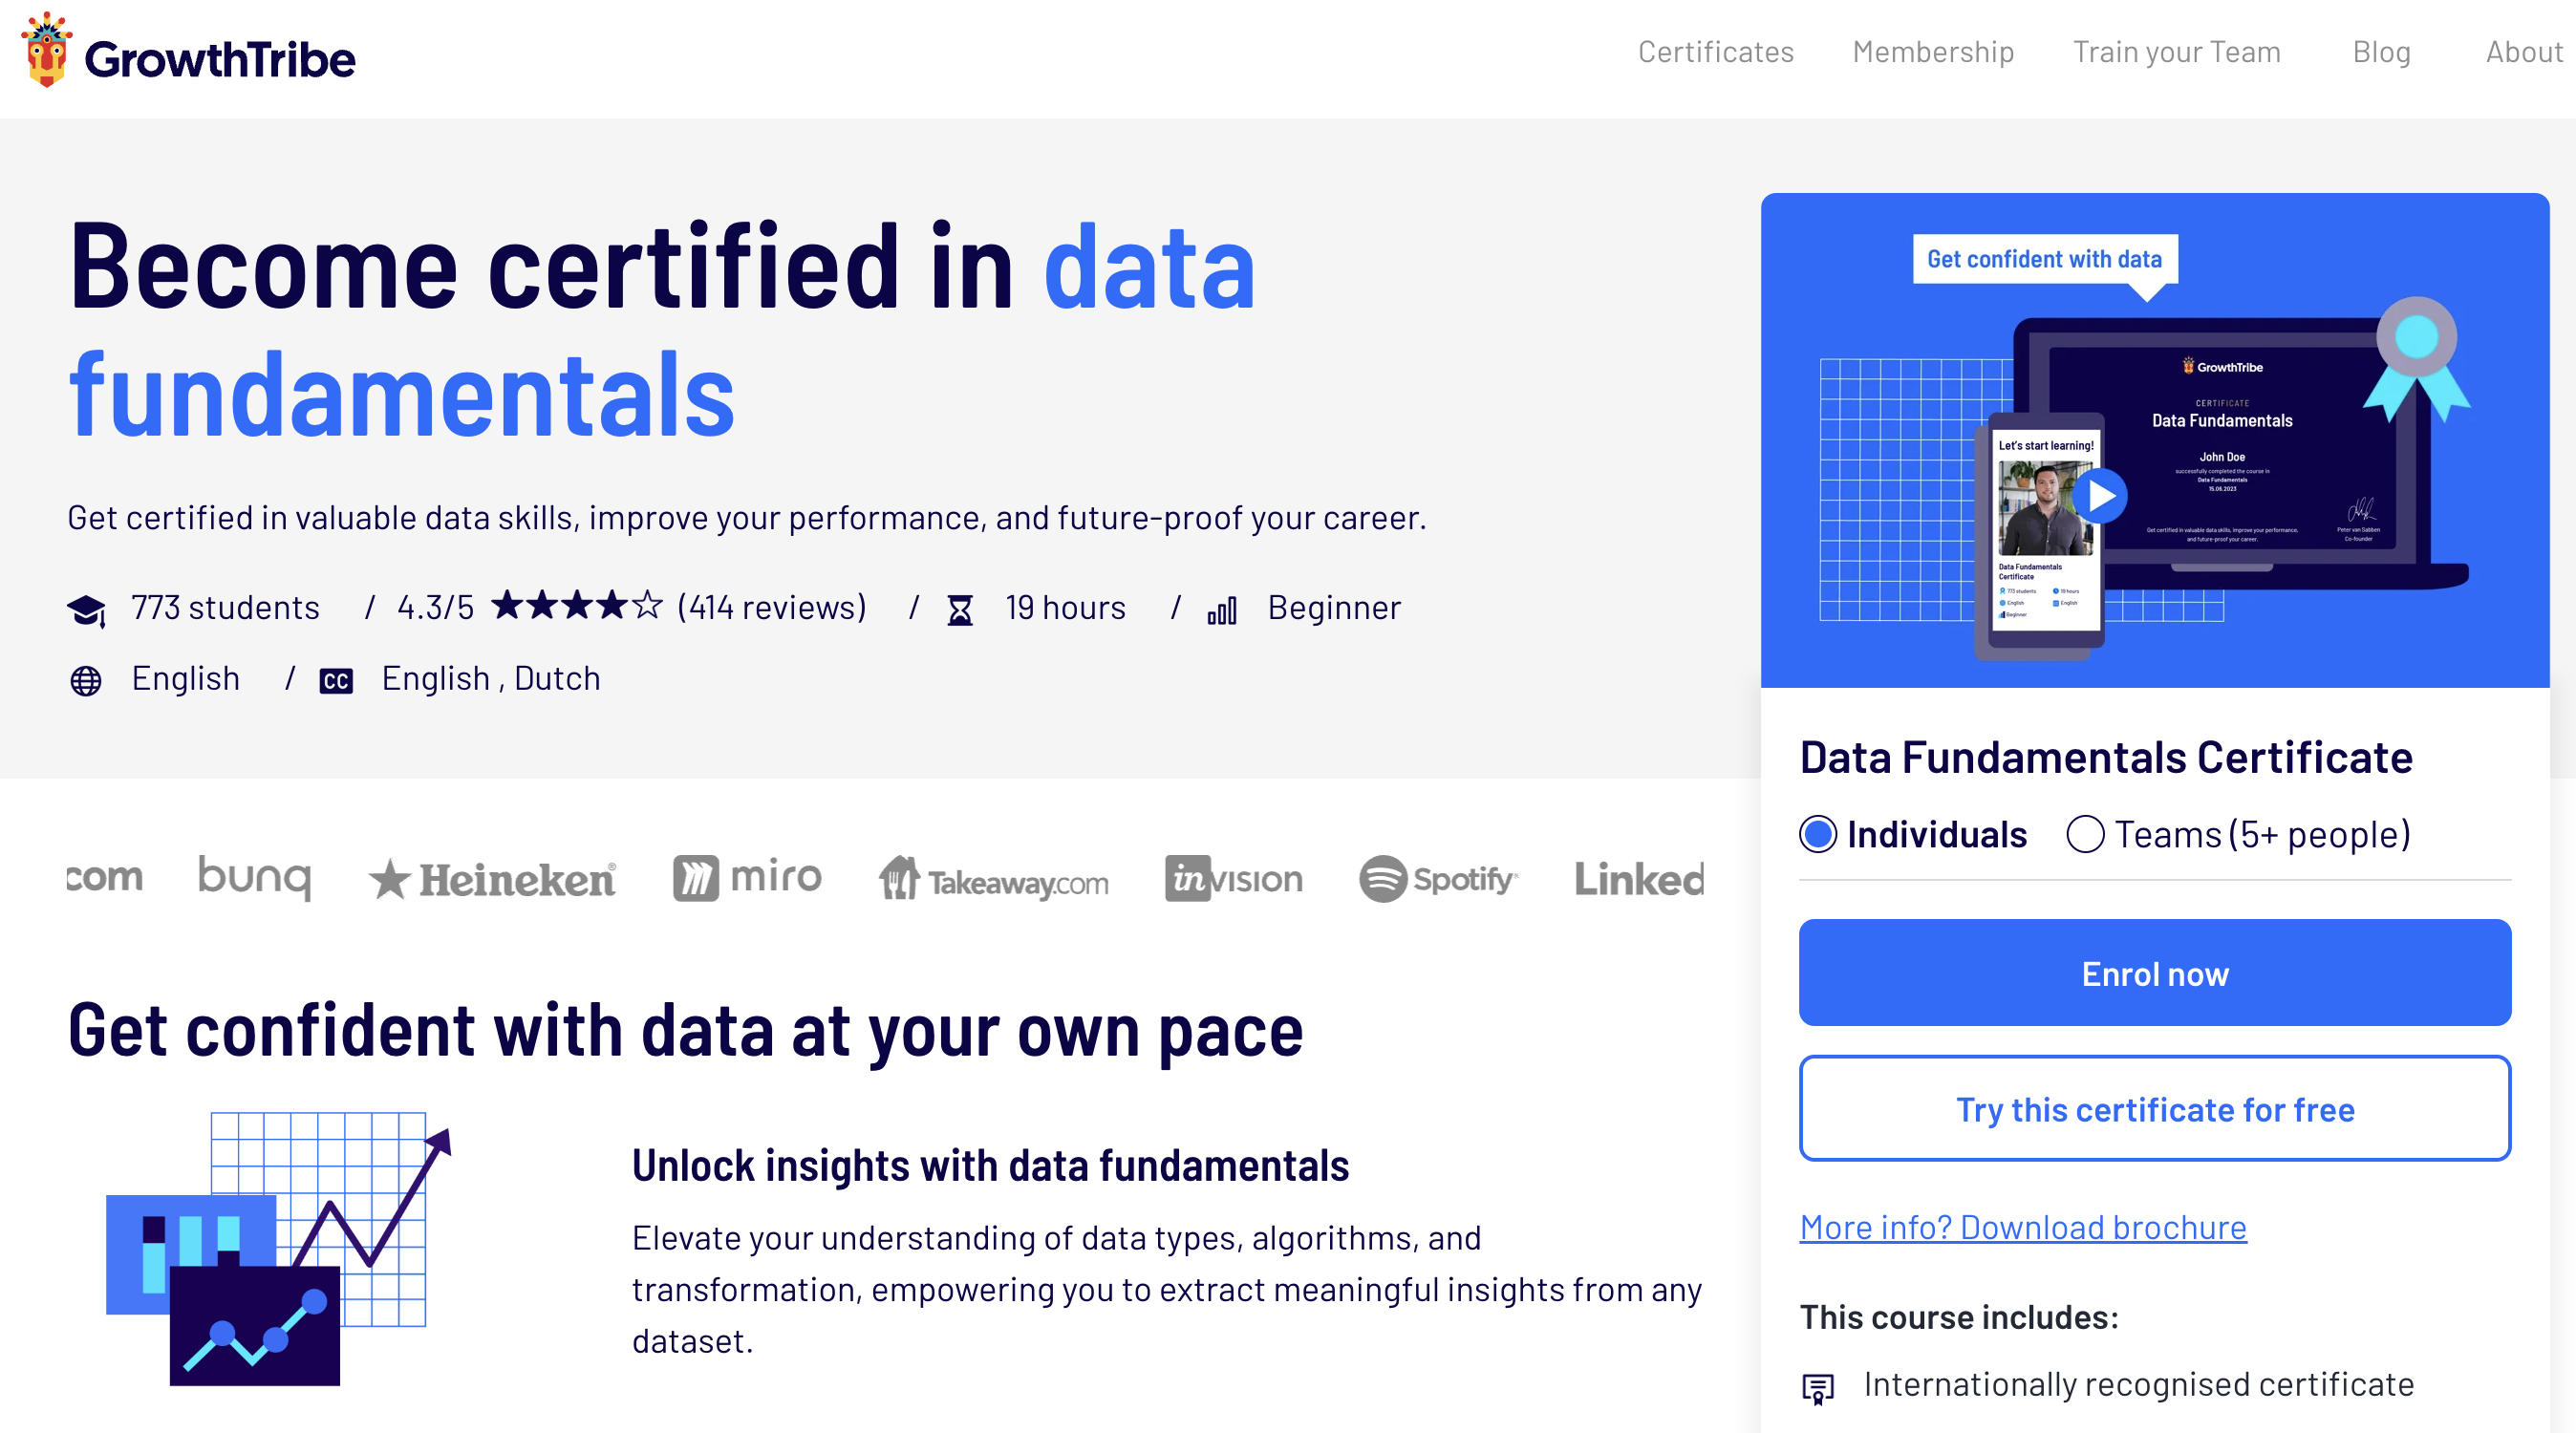 Data fundamentals course by Growth Tribe